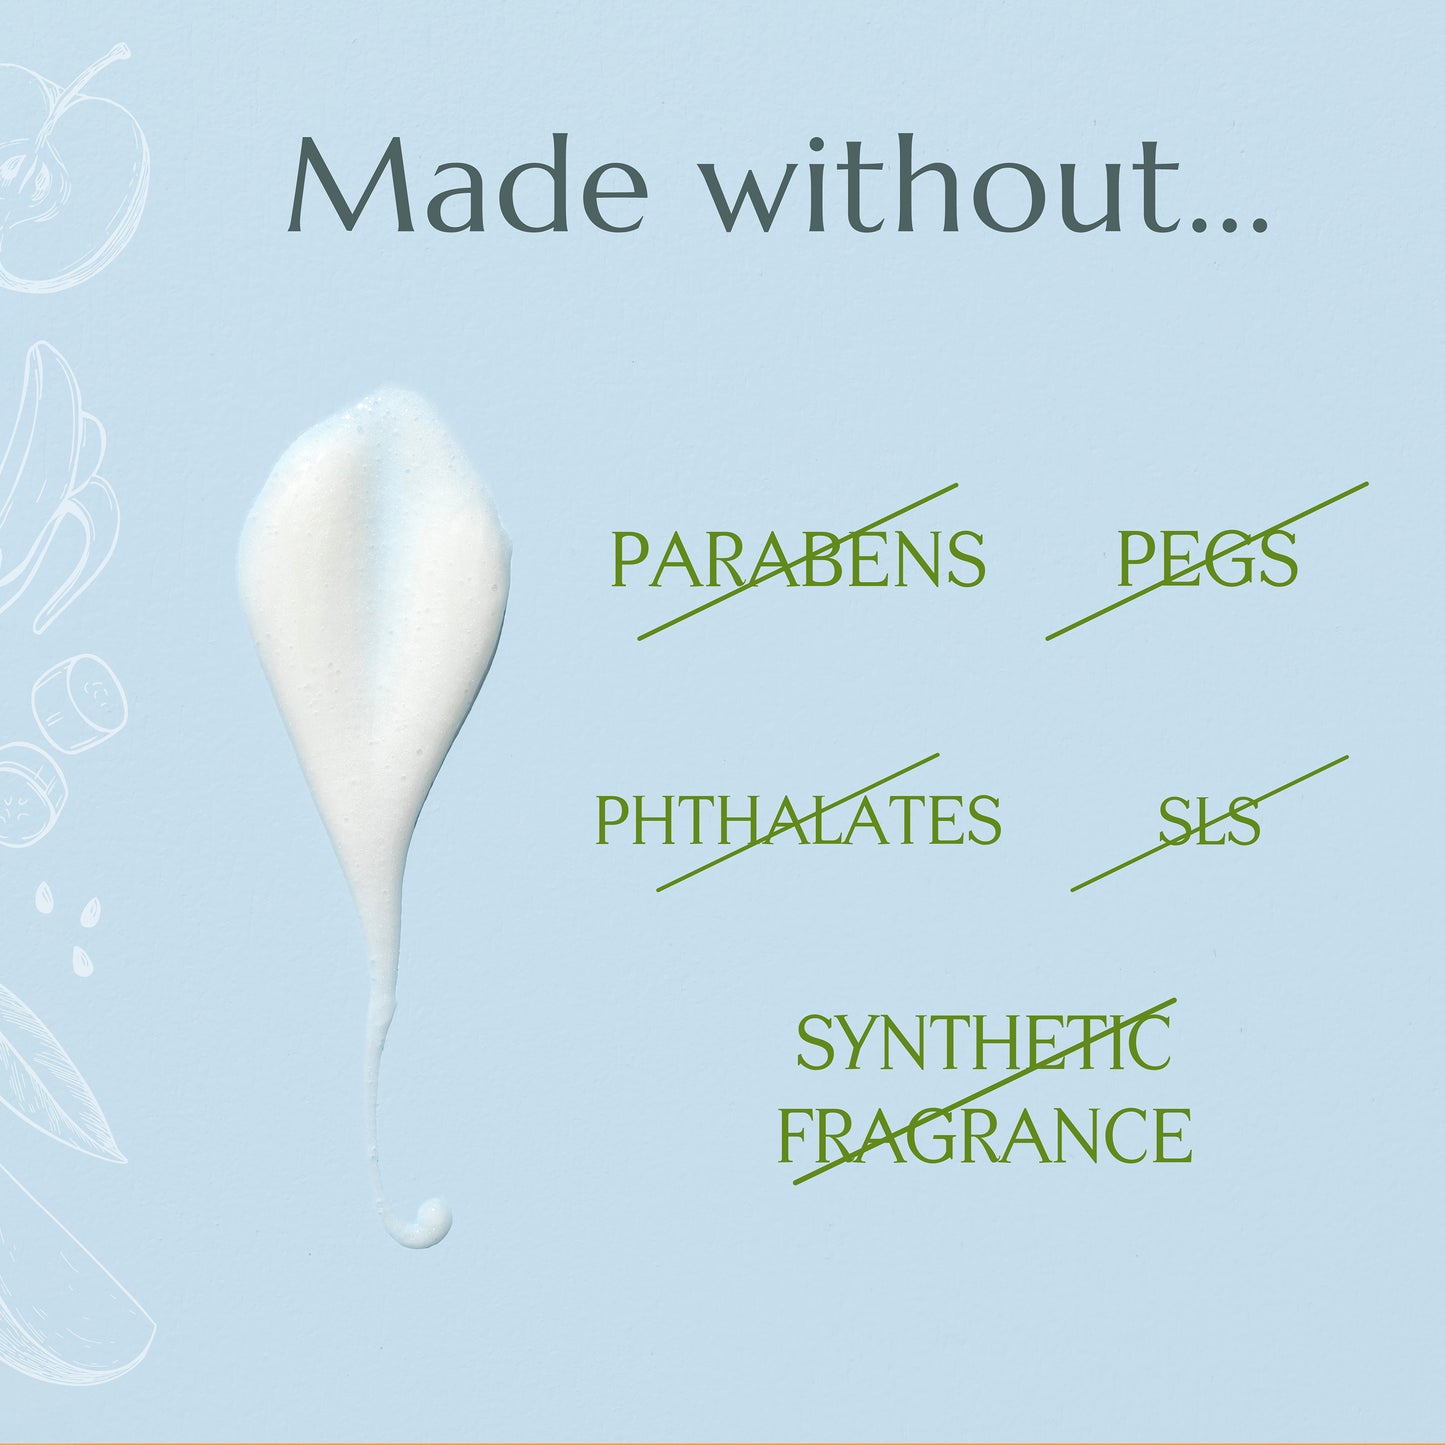 Made without parabens, pegs, phthalates, sls, synthetic fragrance